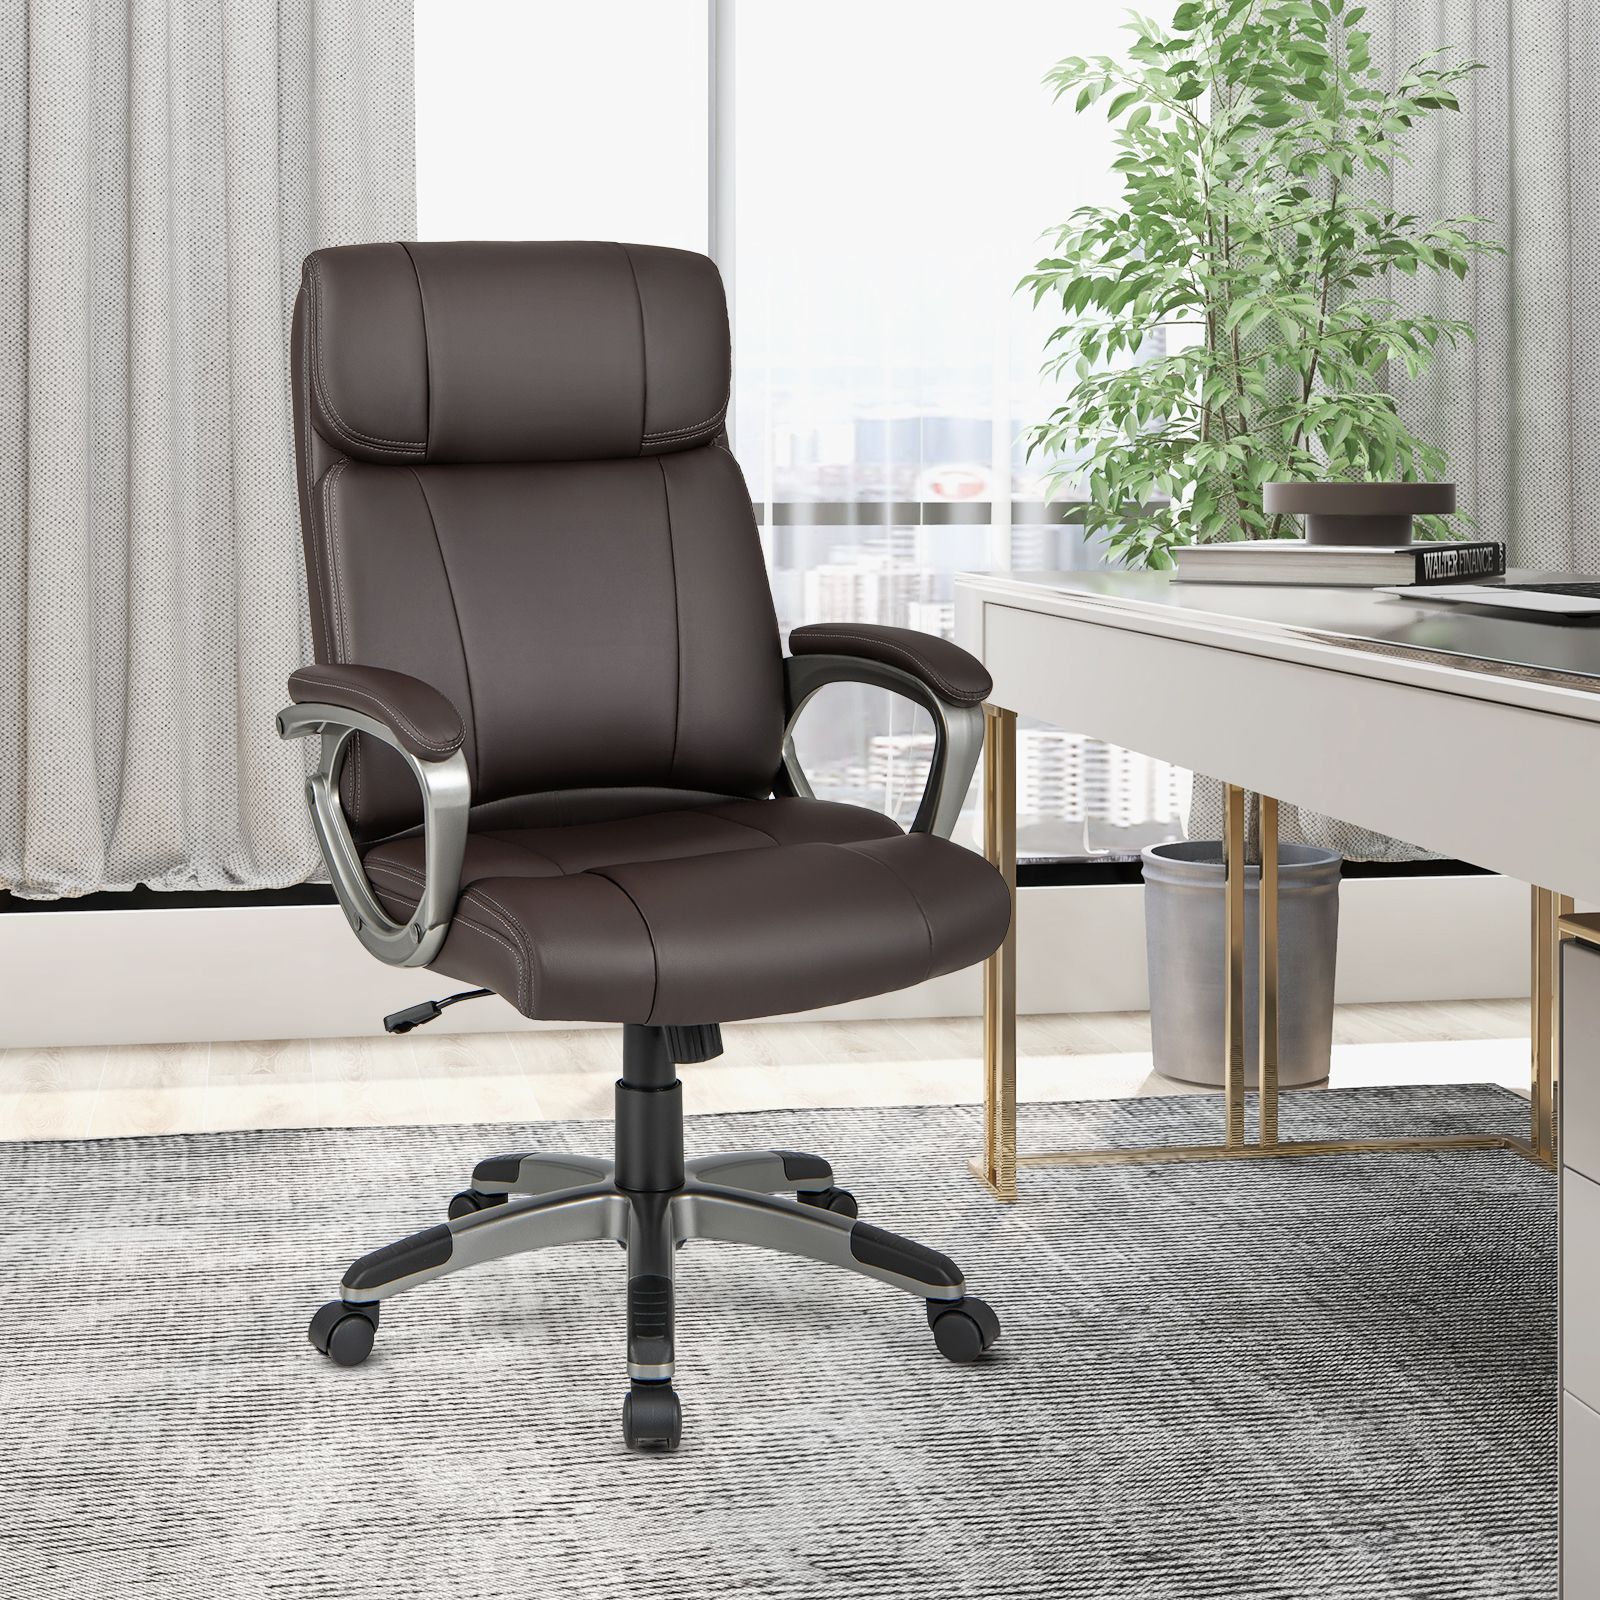 Ergonomic Office Chair with Flip-up Armrests and Rocking Function